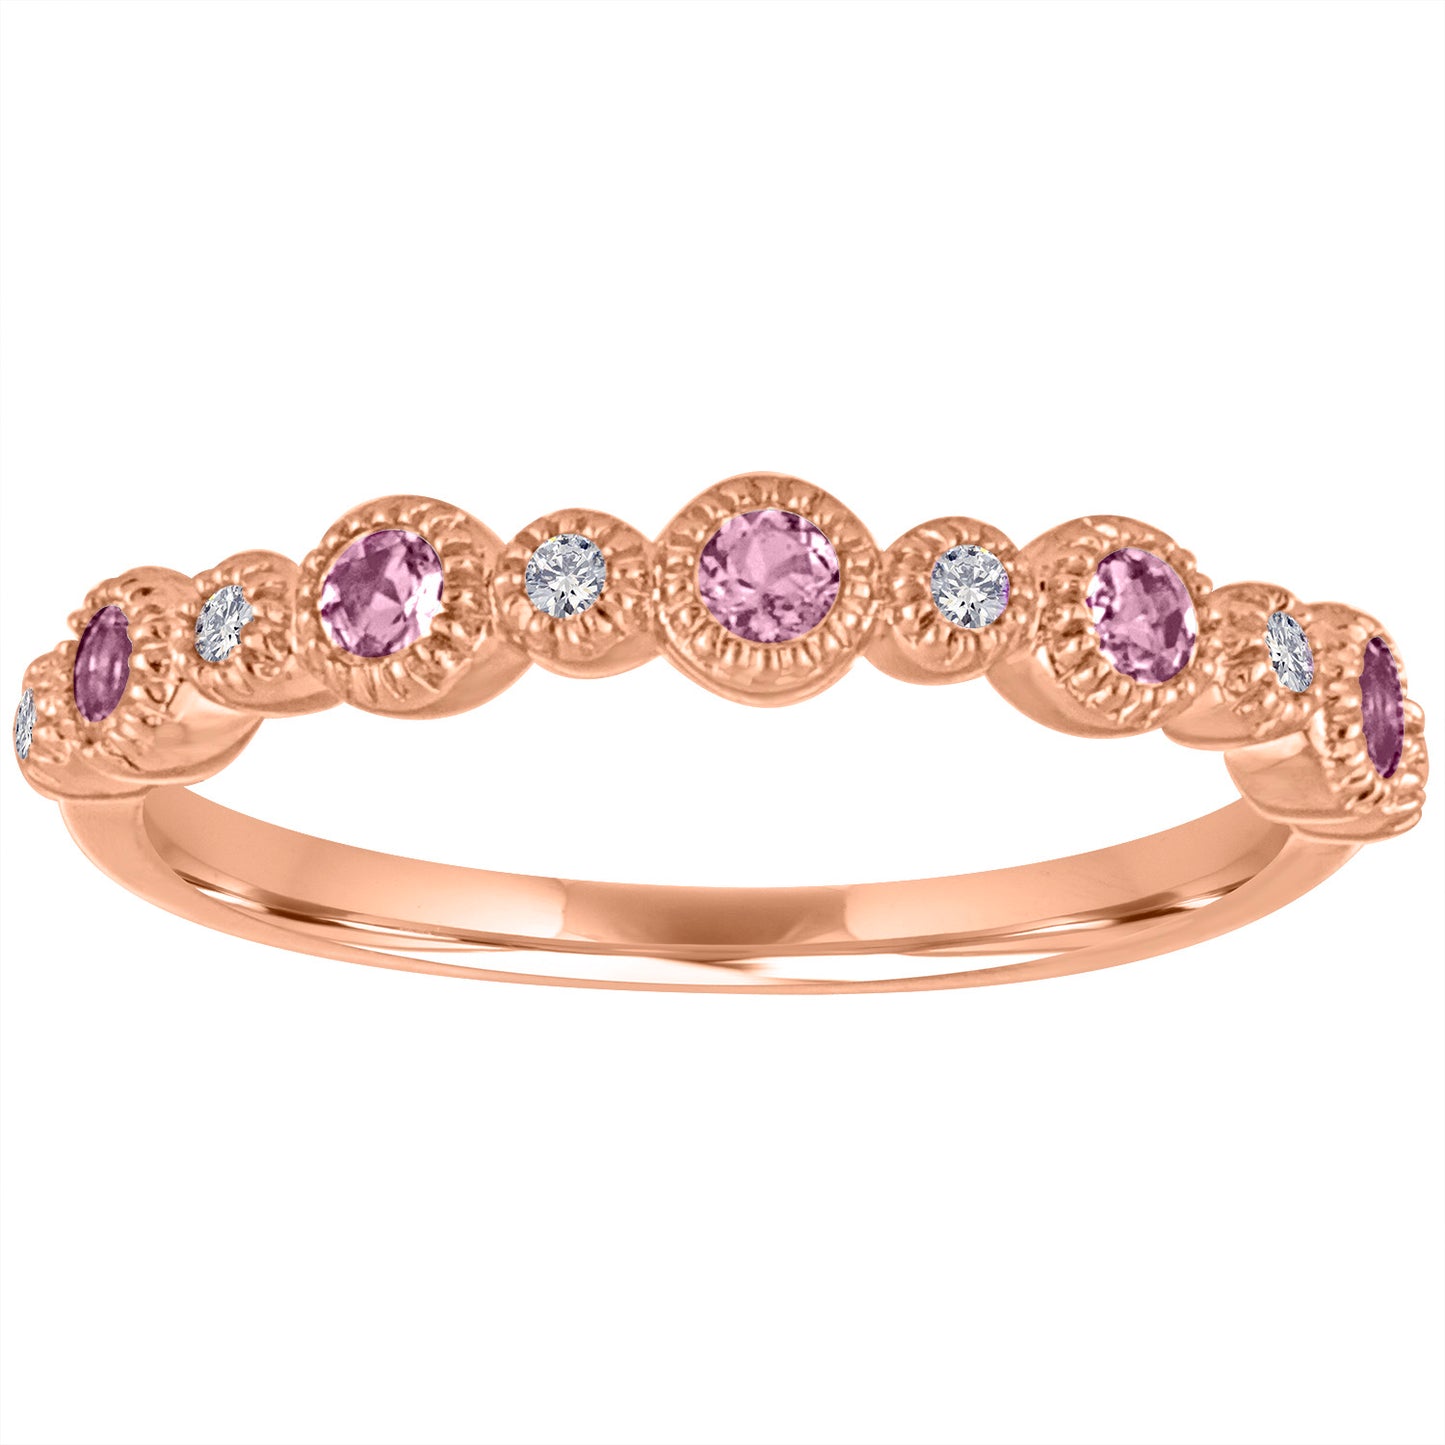 Rose gold skinny band with large round pink tourmalines and small round diamonds.